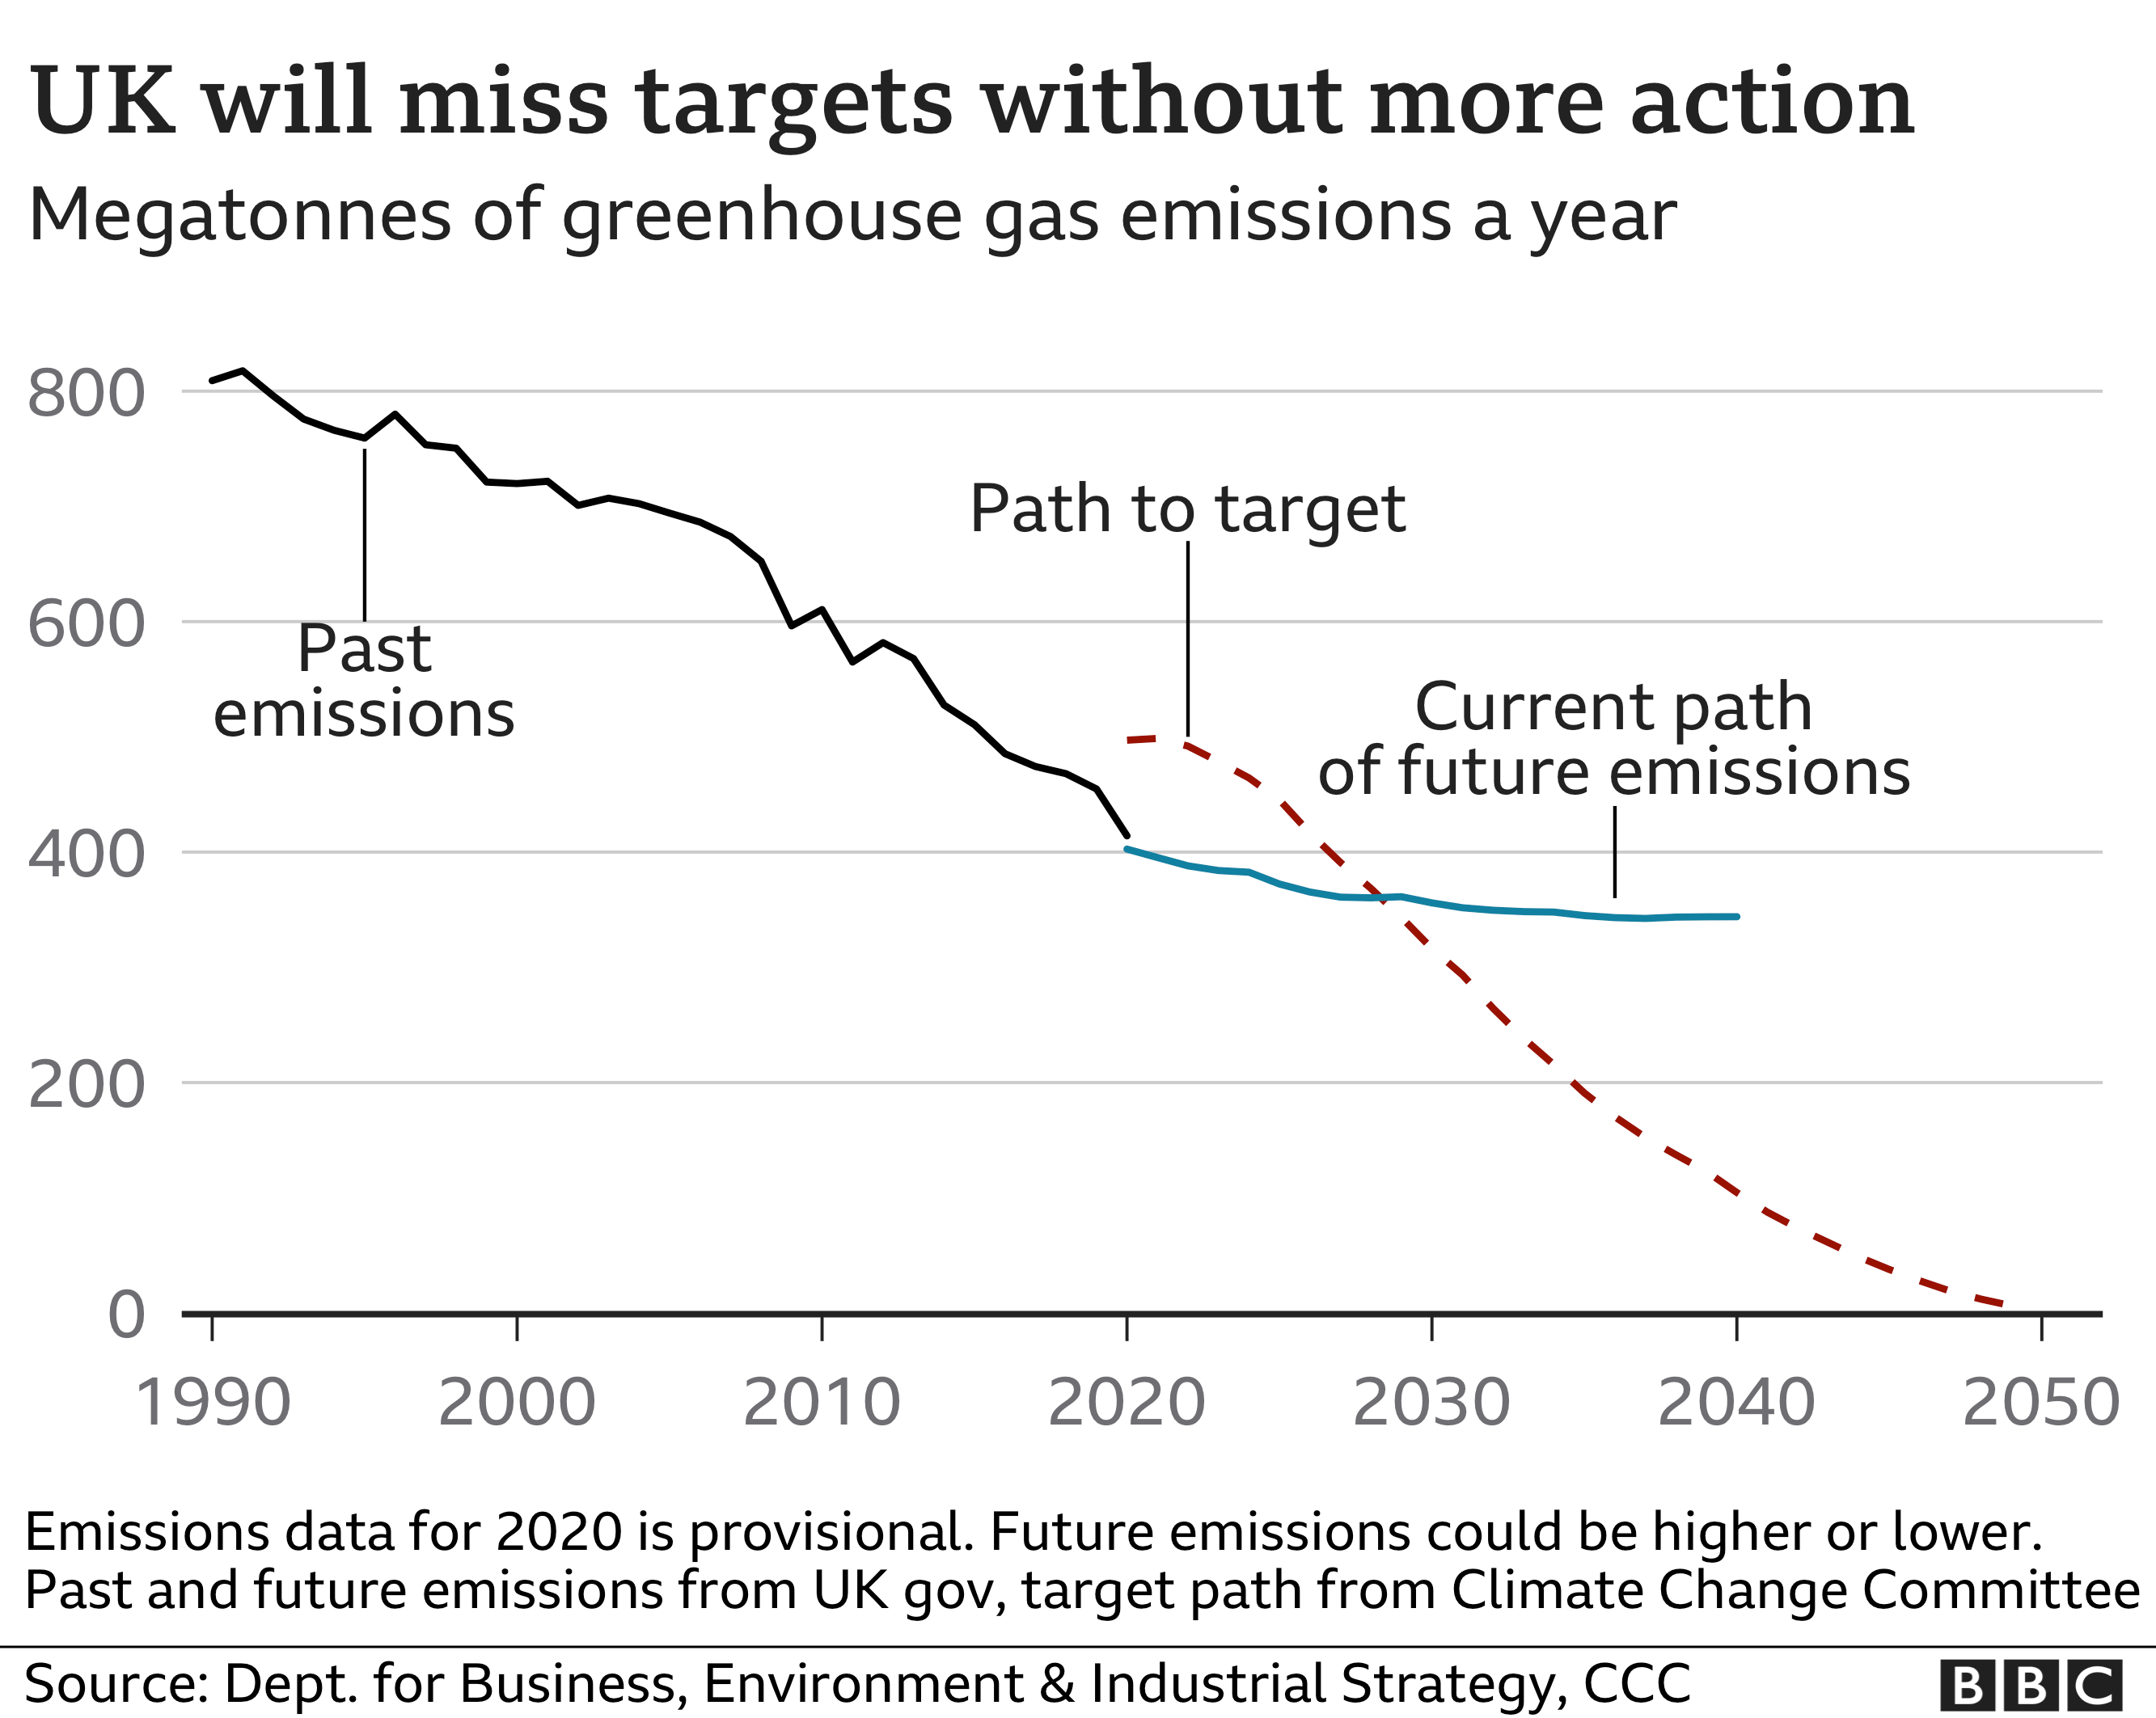 Graph of UK emissions and targets